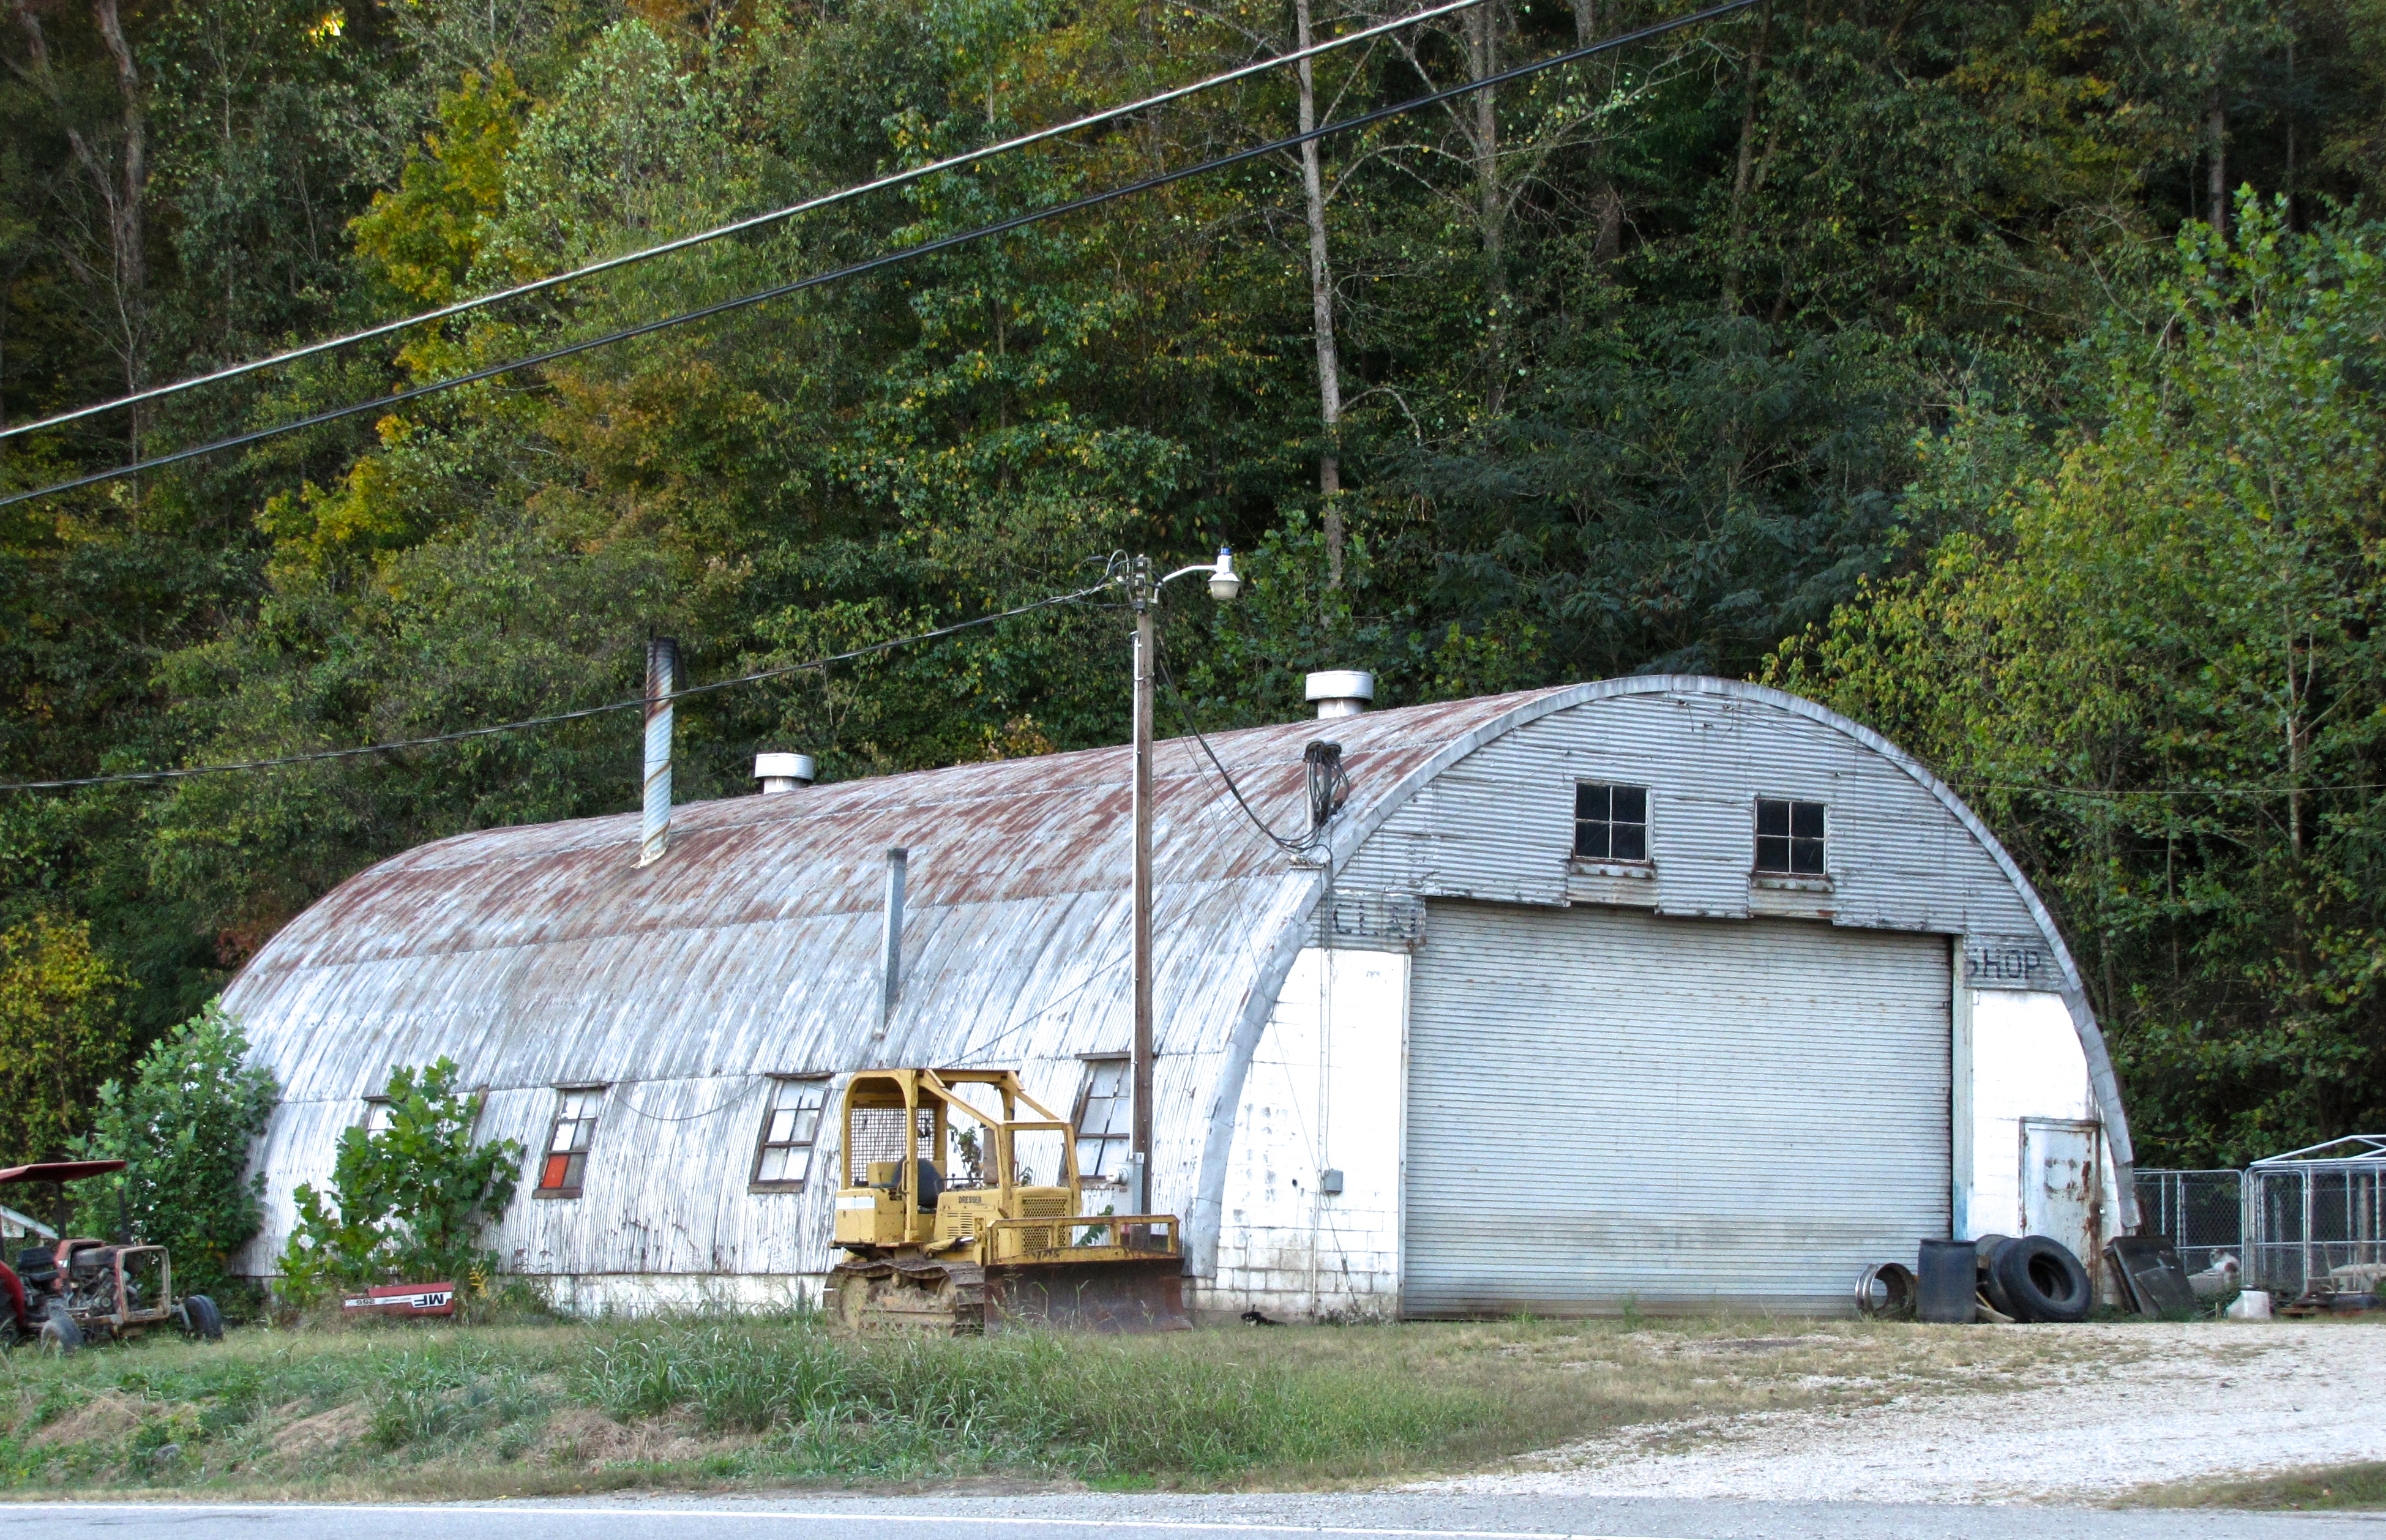 quonset hut in Chapel Hill, NC